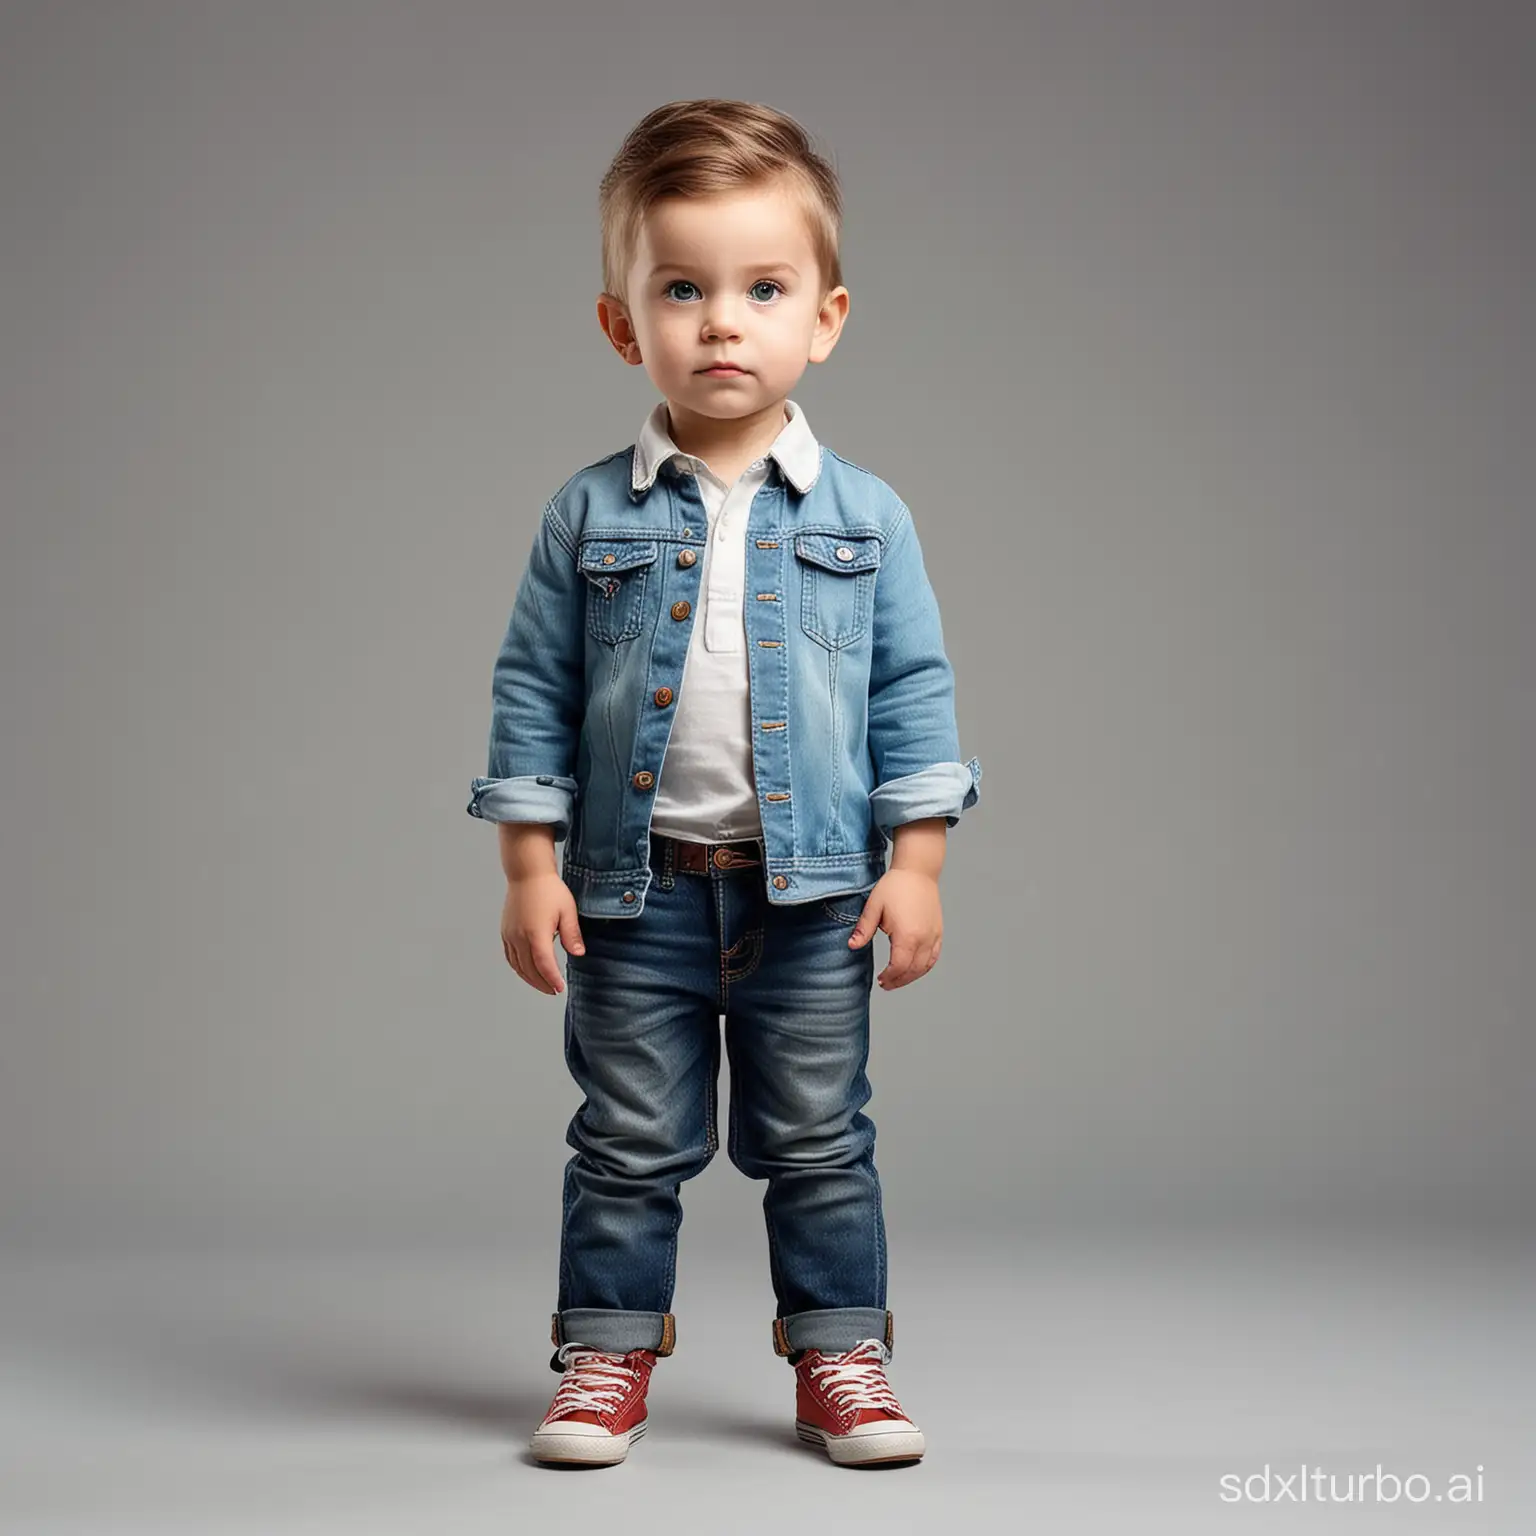 Young-Child-Fashion-Photographer-Posing-as-a-Game-Character